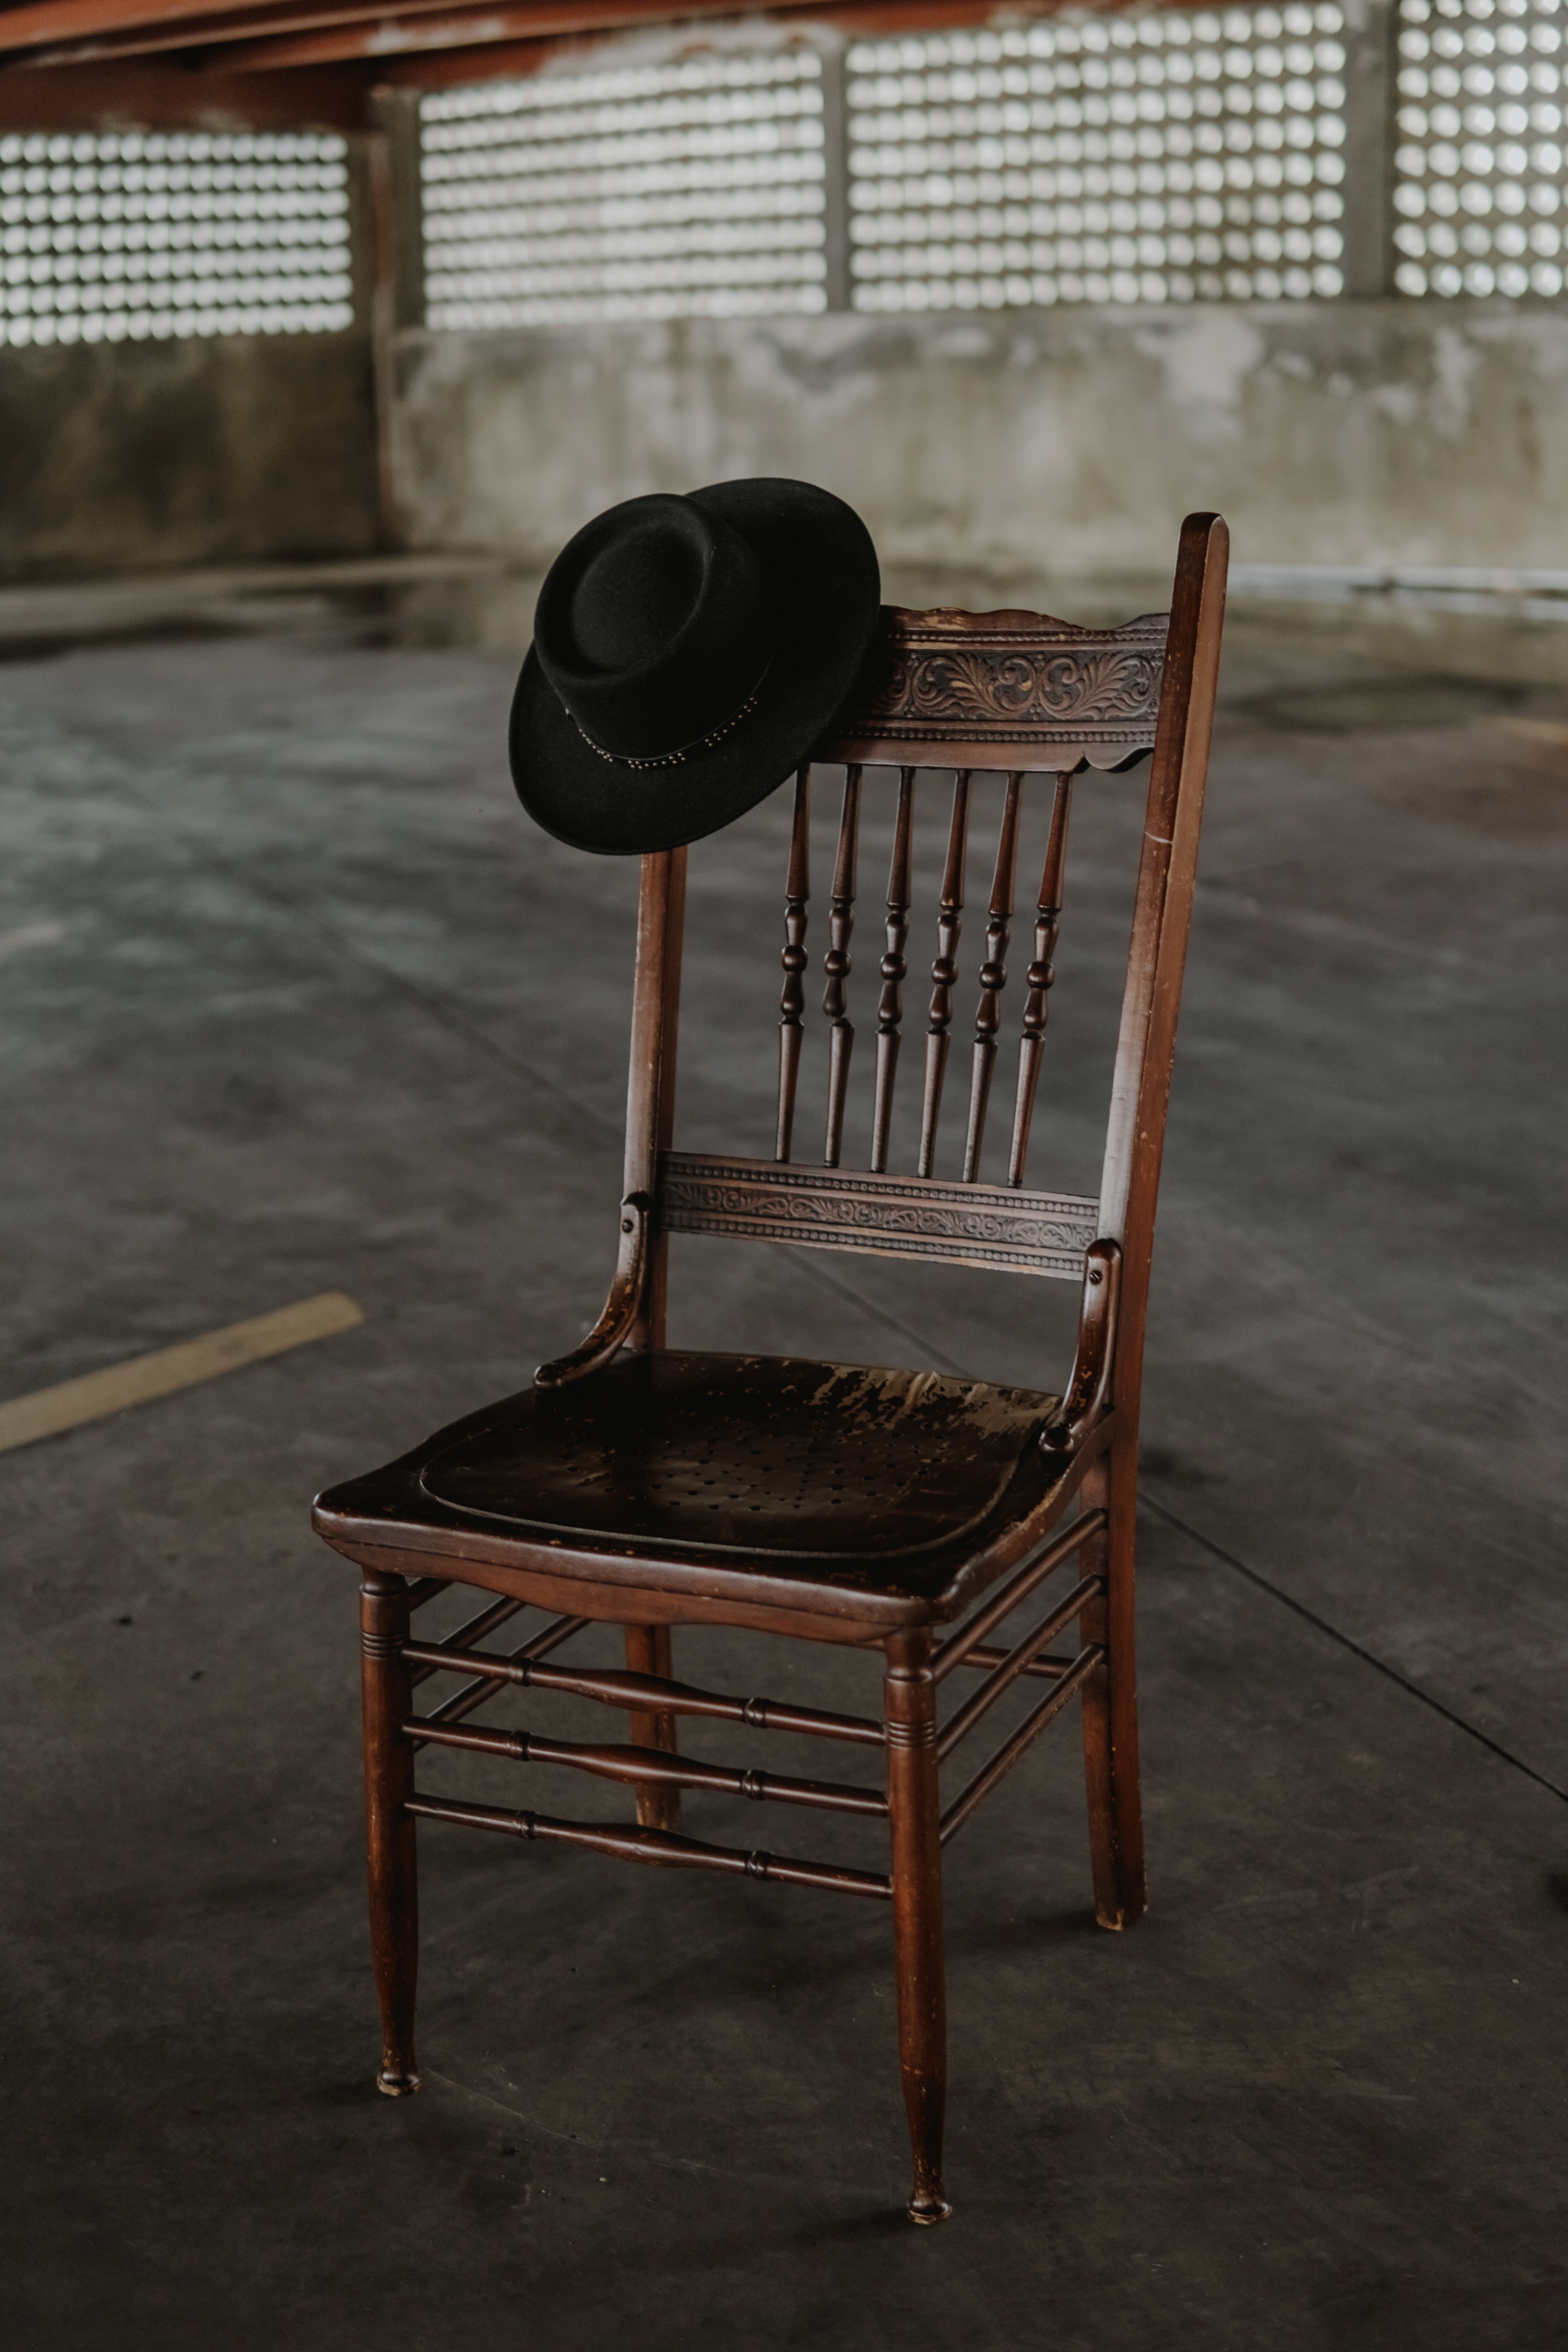 wallpapers furniture, miscellanea, building, miscellaneous, chair, hat